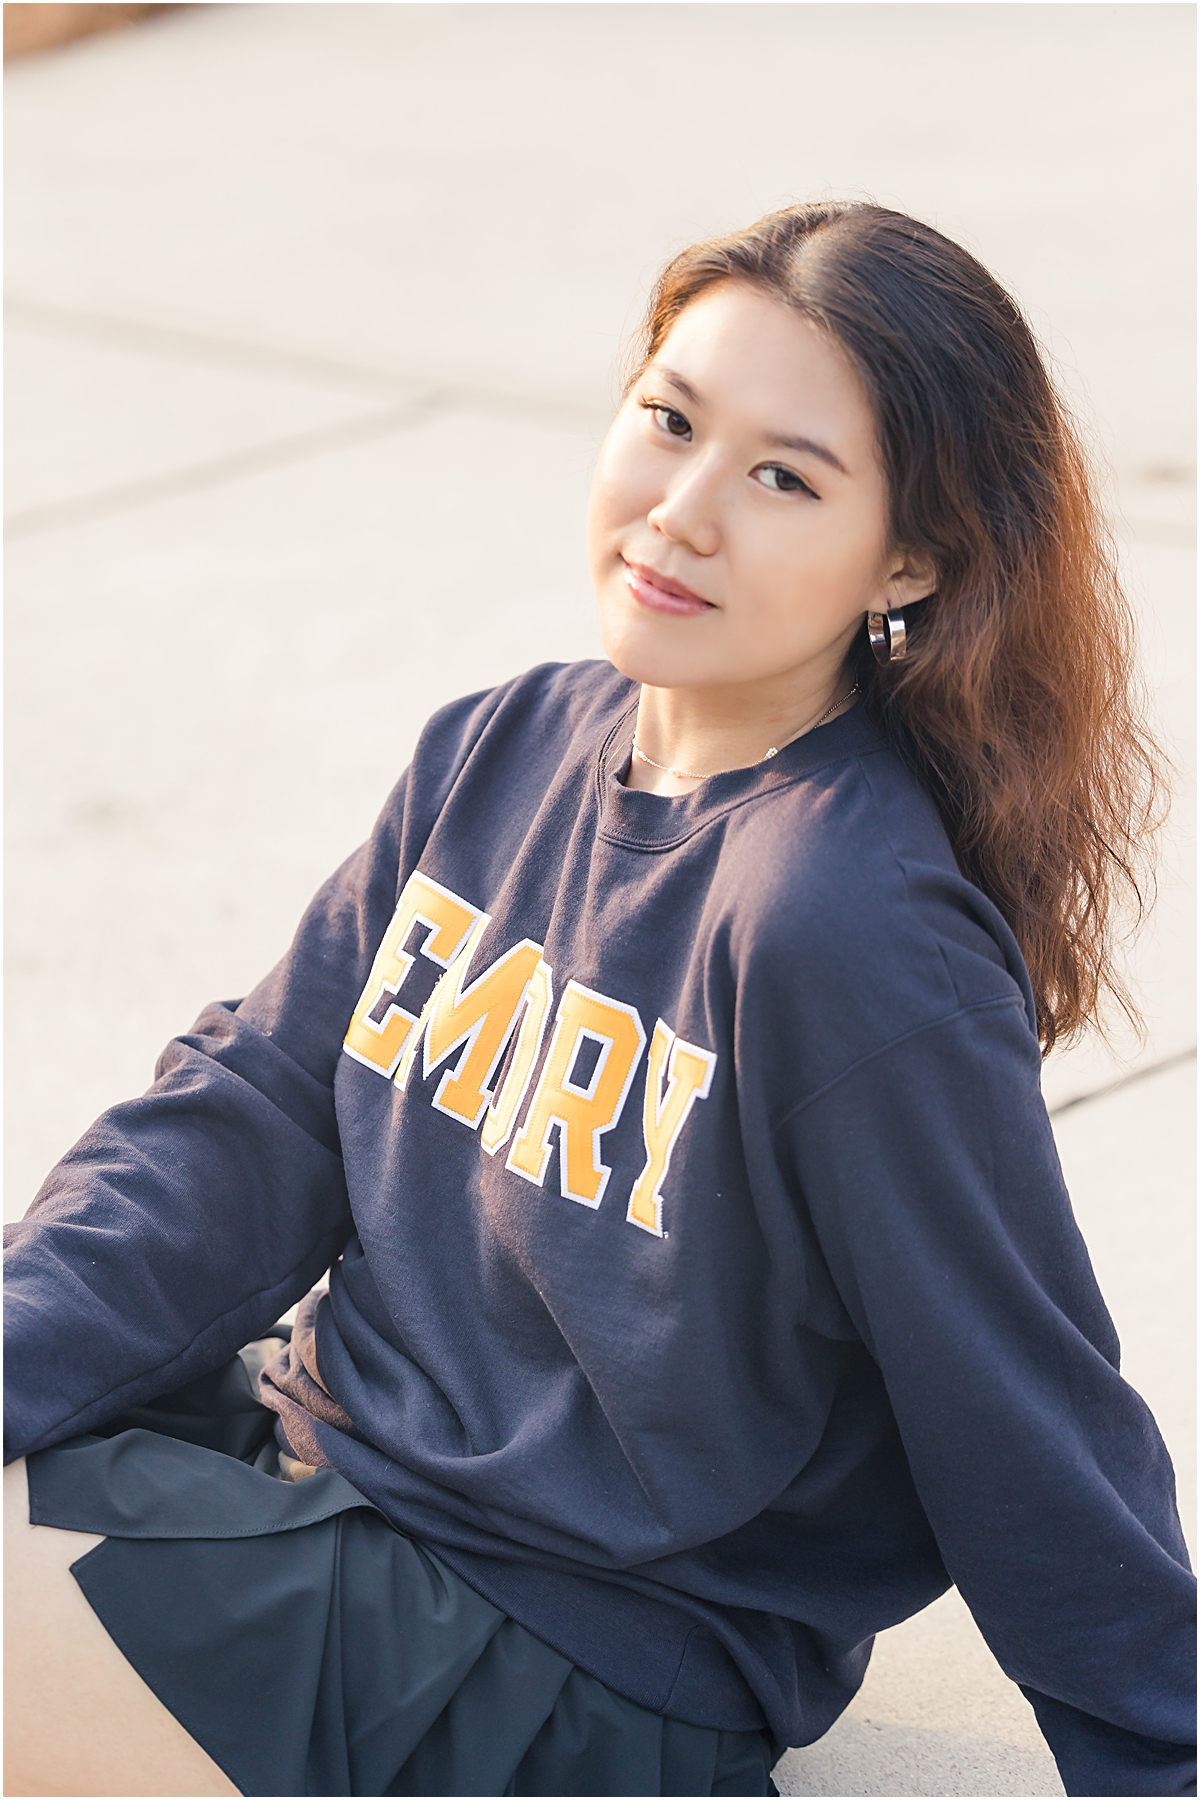 Female graduate sitting on the edge of a sidewalk leaned back on her hand wearing a navy blue t-shirt that says "Emory" in yellow block letters with white outlines as she looks up and softly smiles at the Emory University Senior Photographer